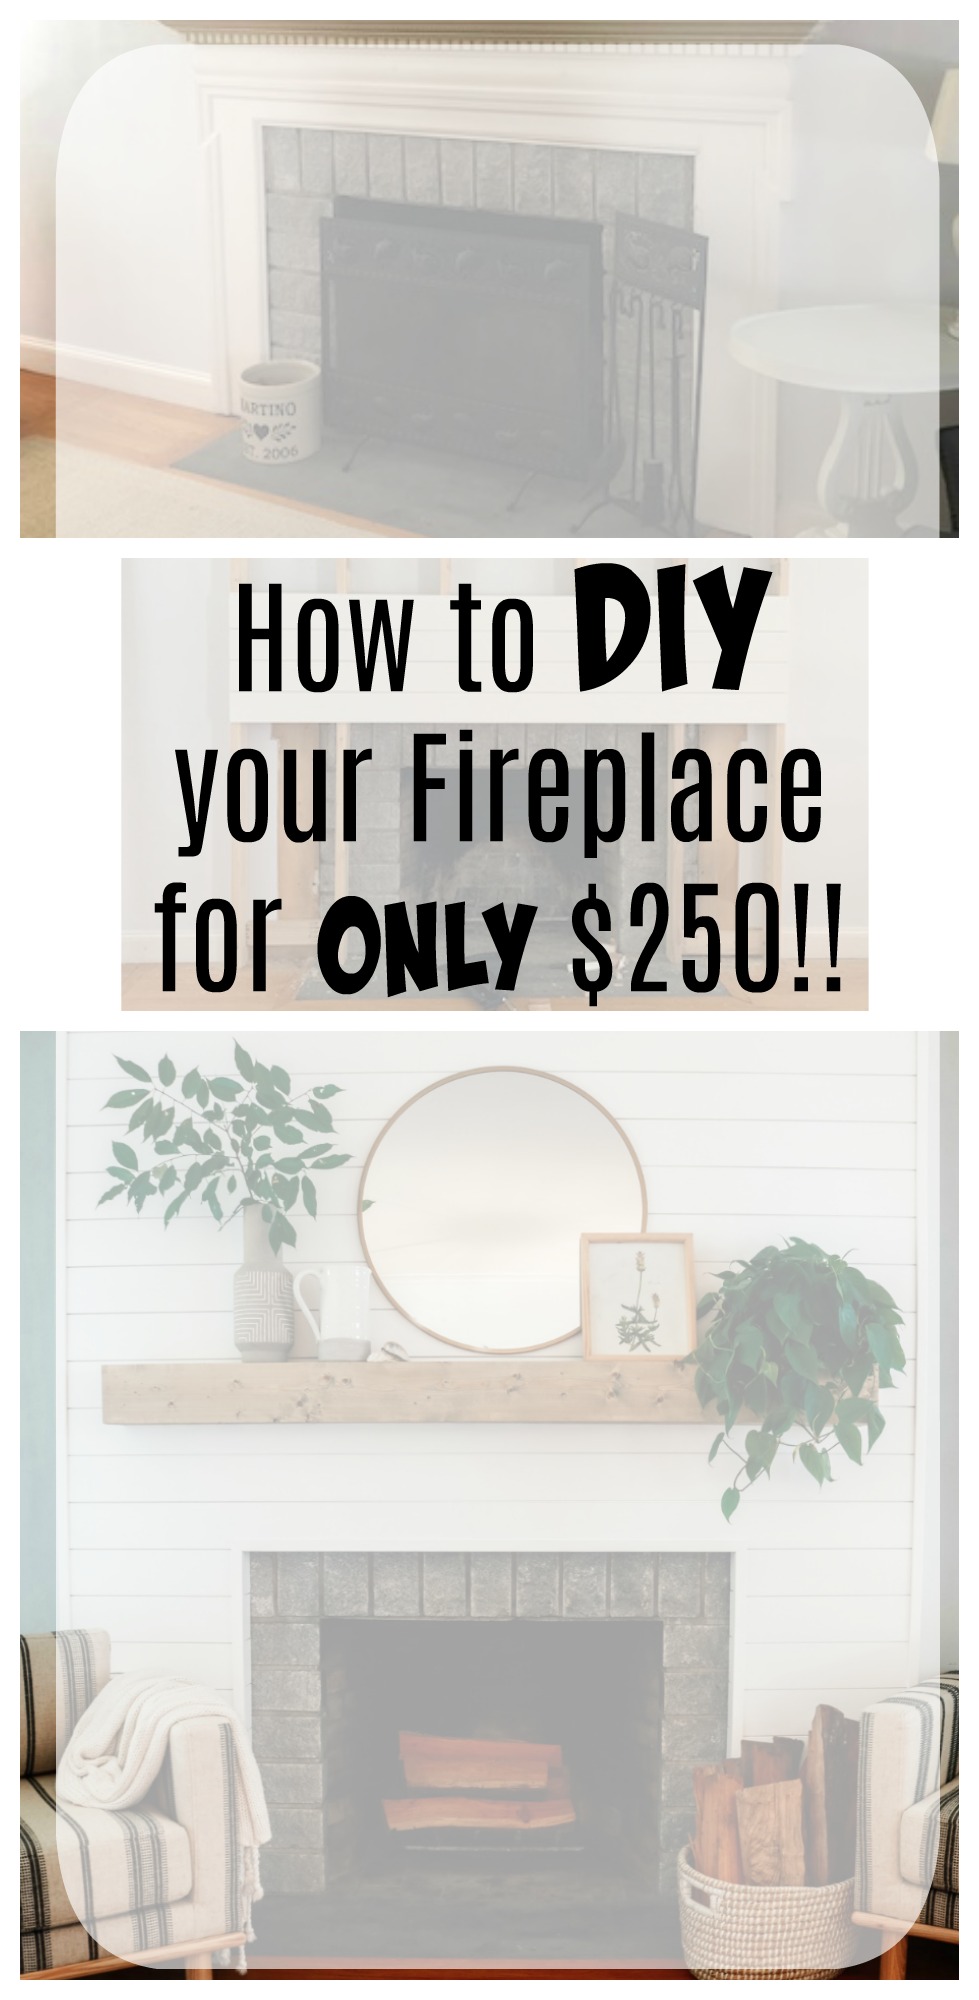 Diy Fireplace Surround and Mantel Beautiful Shiplap Fireplace and Diy Mantle Ditched the Old